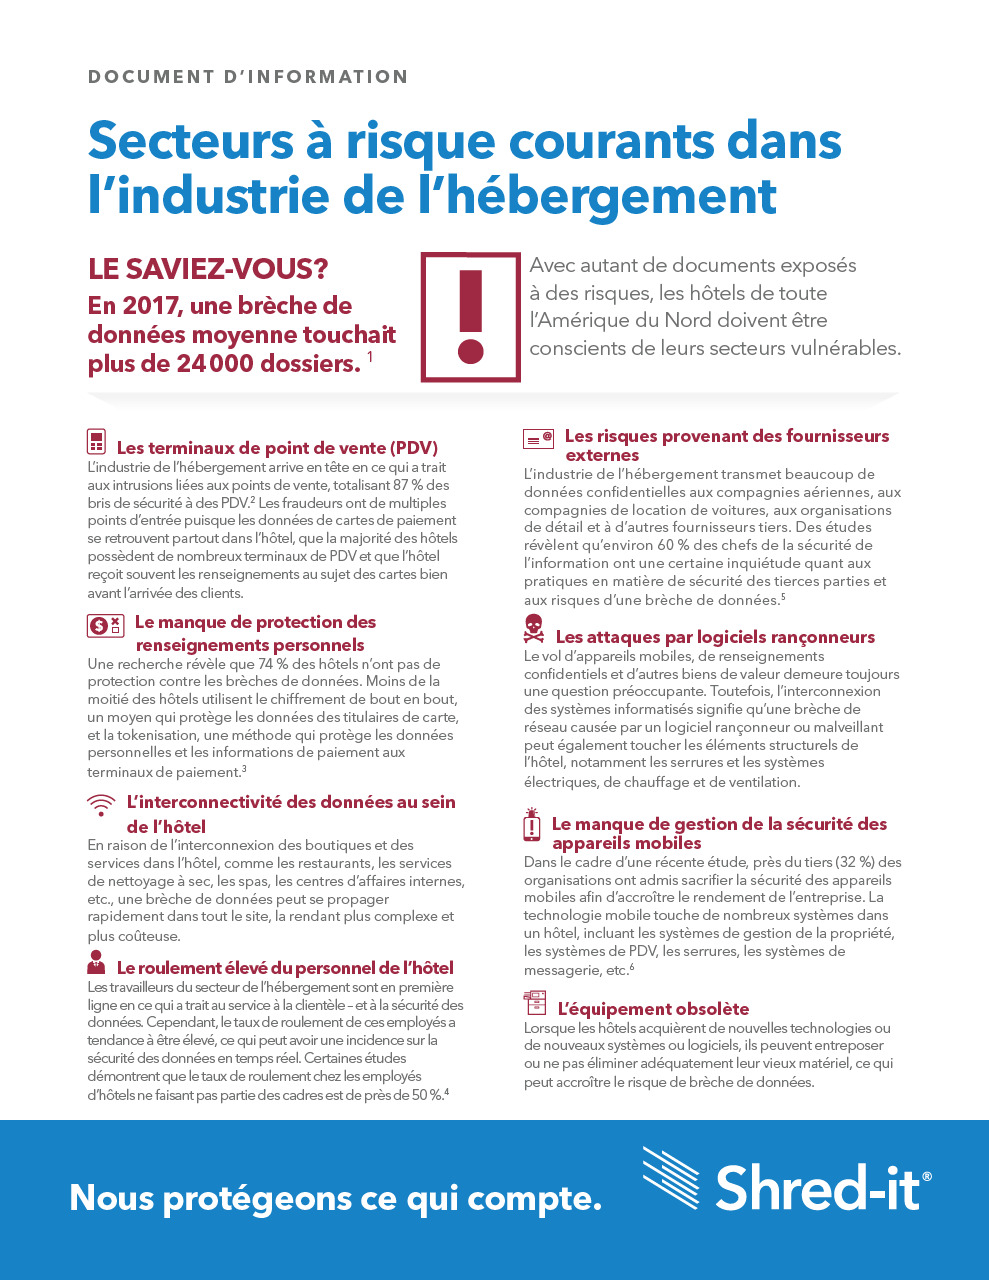 Shred-it-Hospitality-Common-Areas-of-Risk-French.pdf